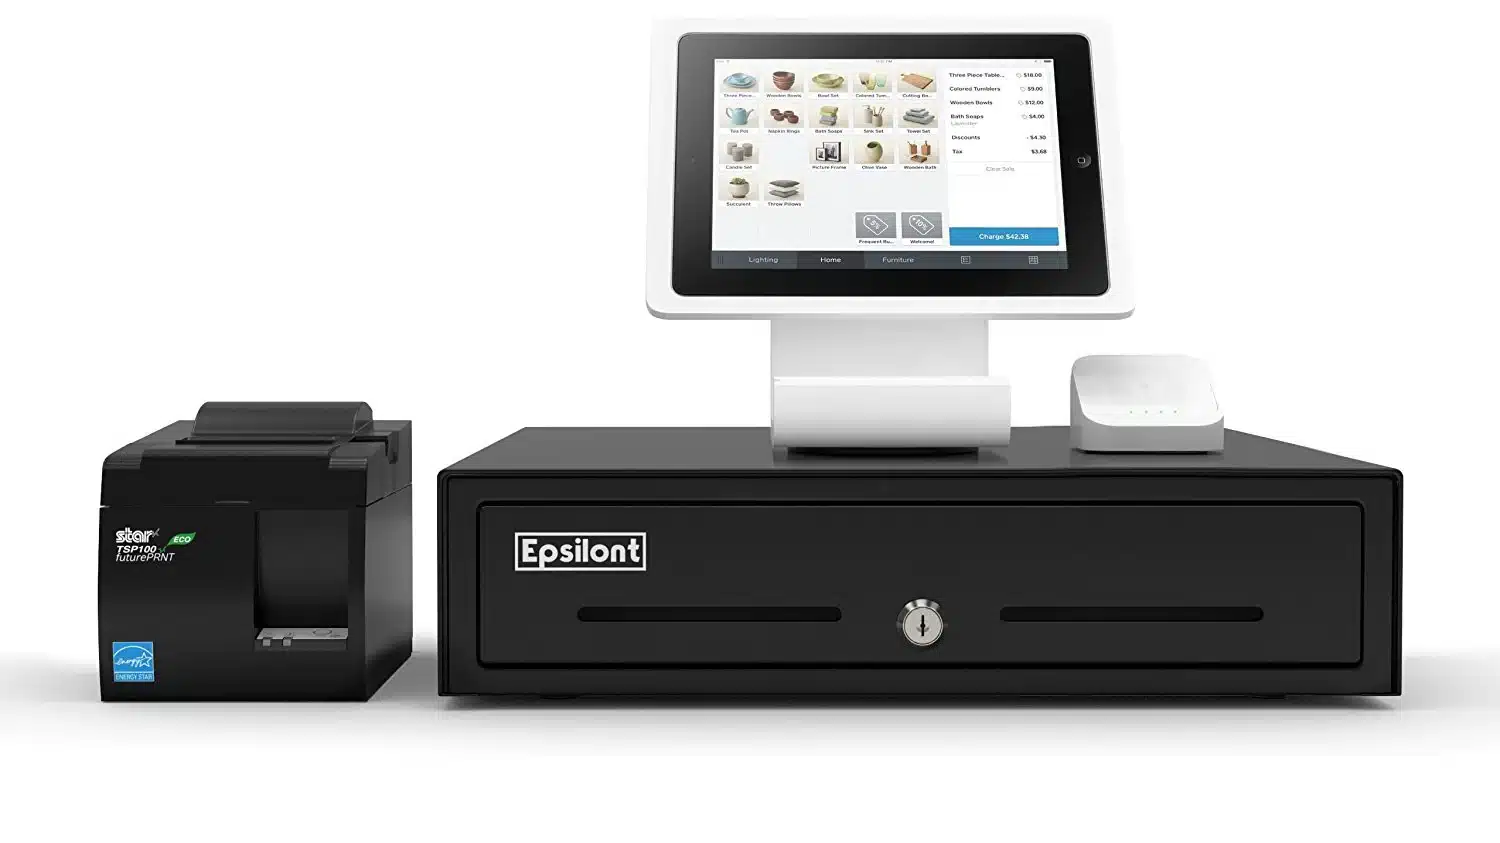 Square cash register with software and hardware including cash drawer, tablet stand, credit card reader, and receipt printer